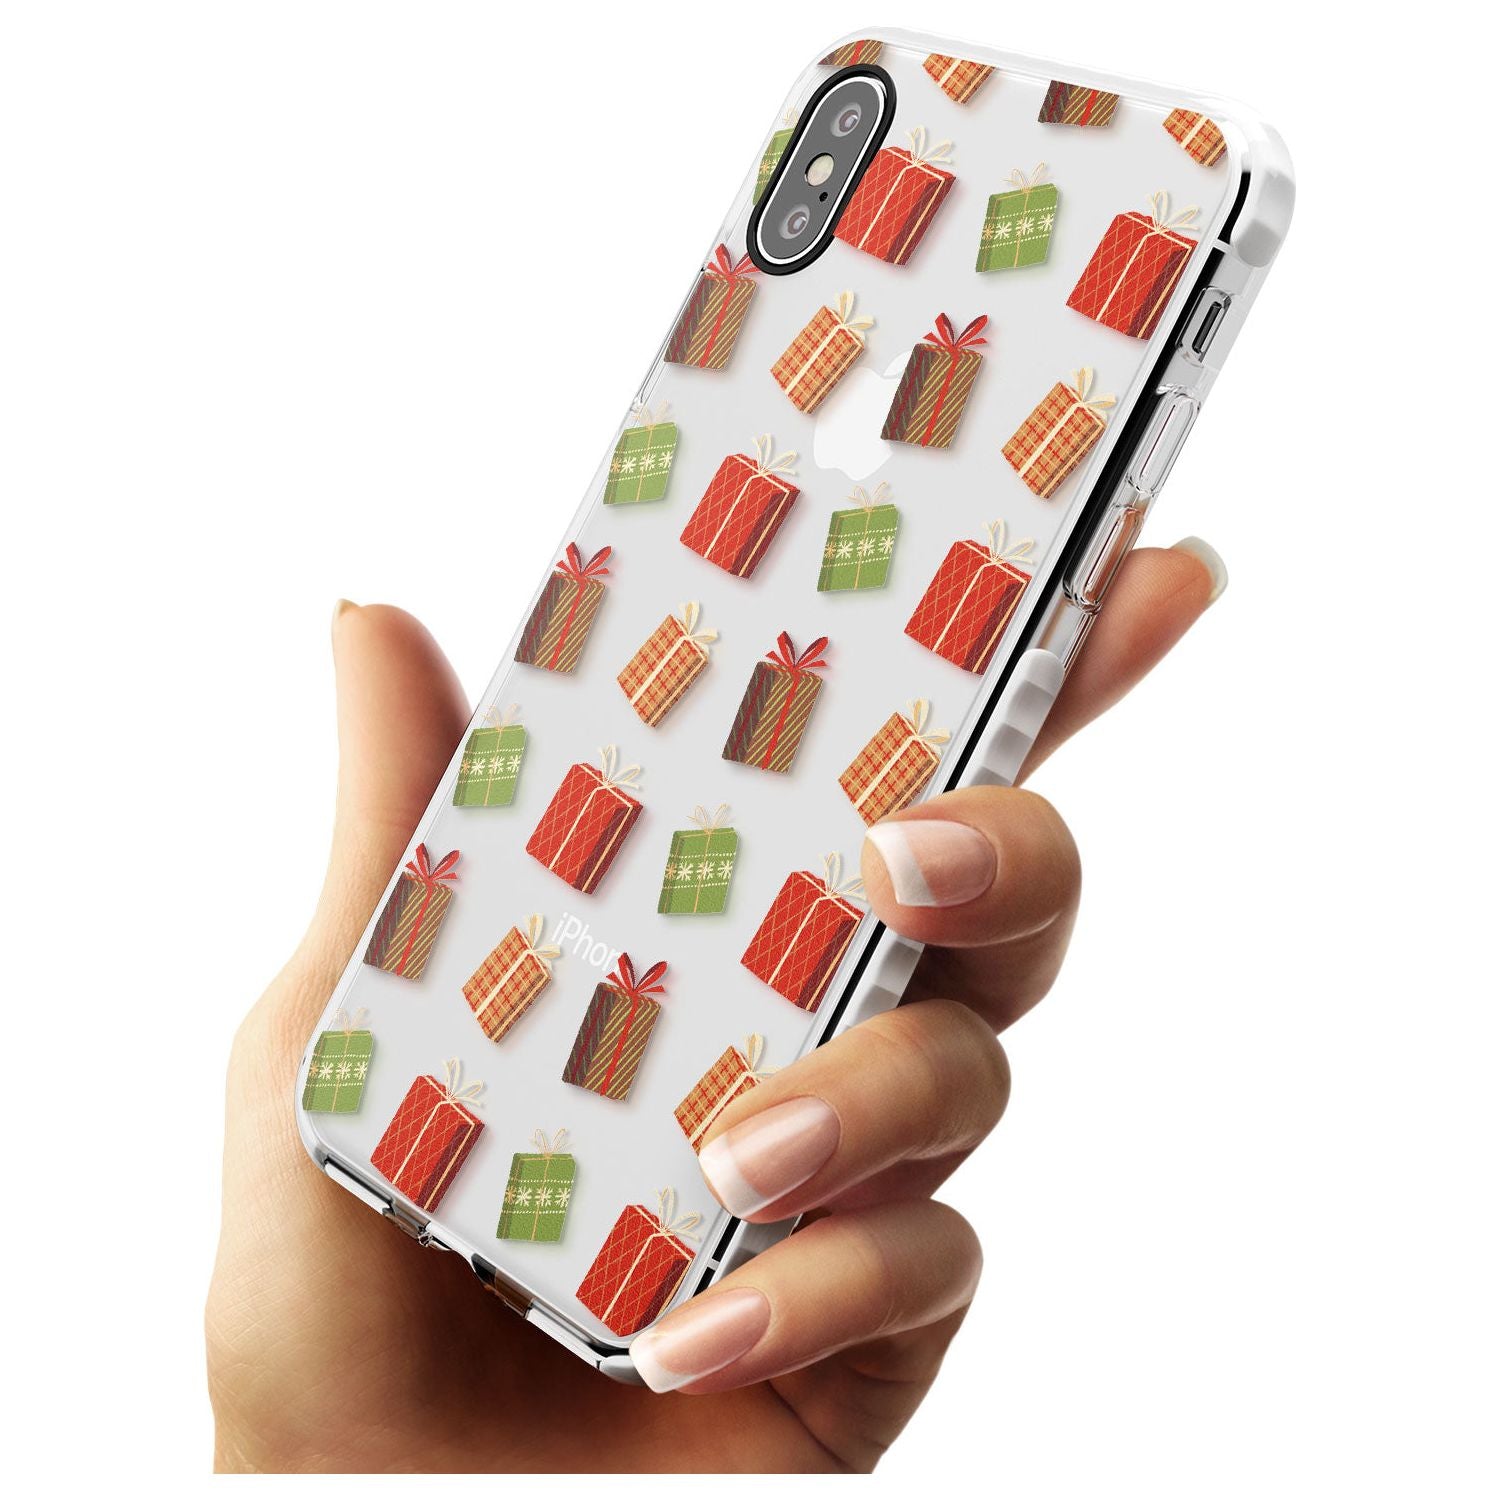 Christmas Presents Pattern Impact Phone Case for iPhone X XS Max XR